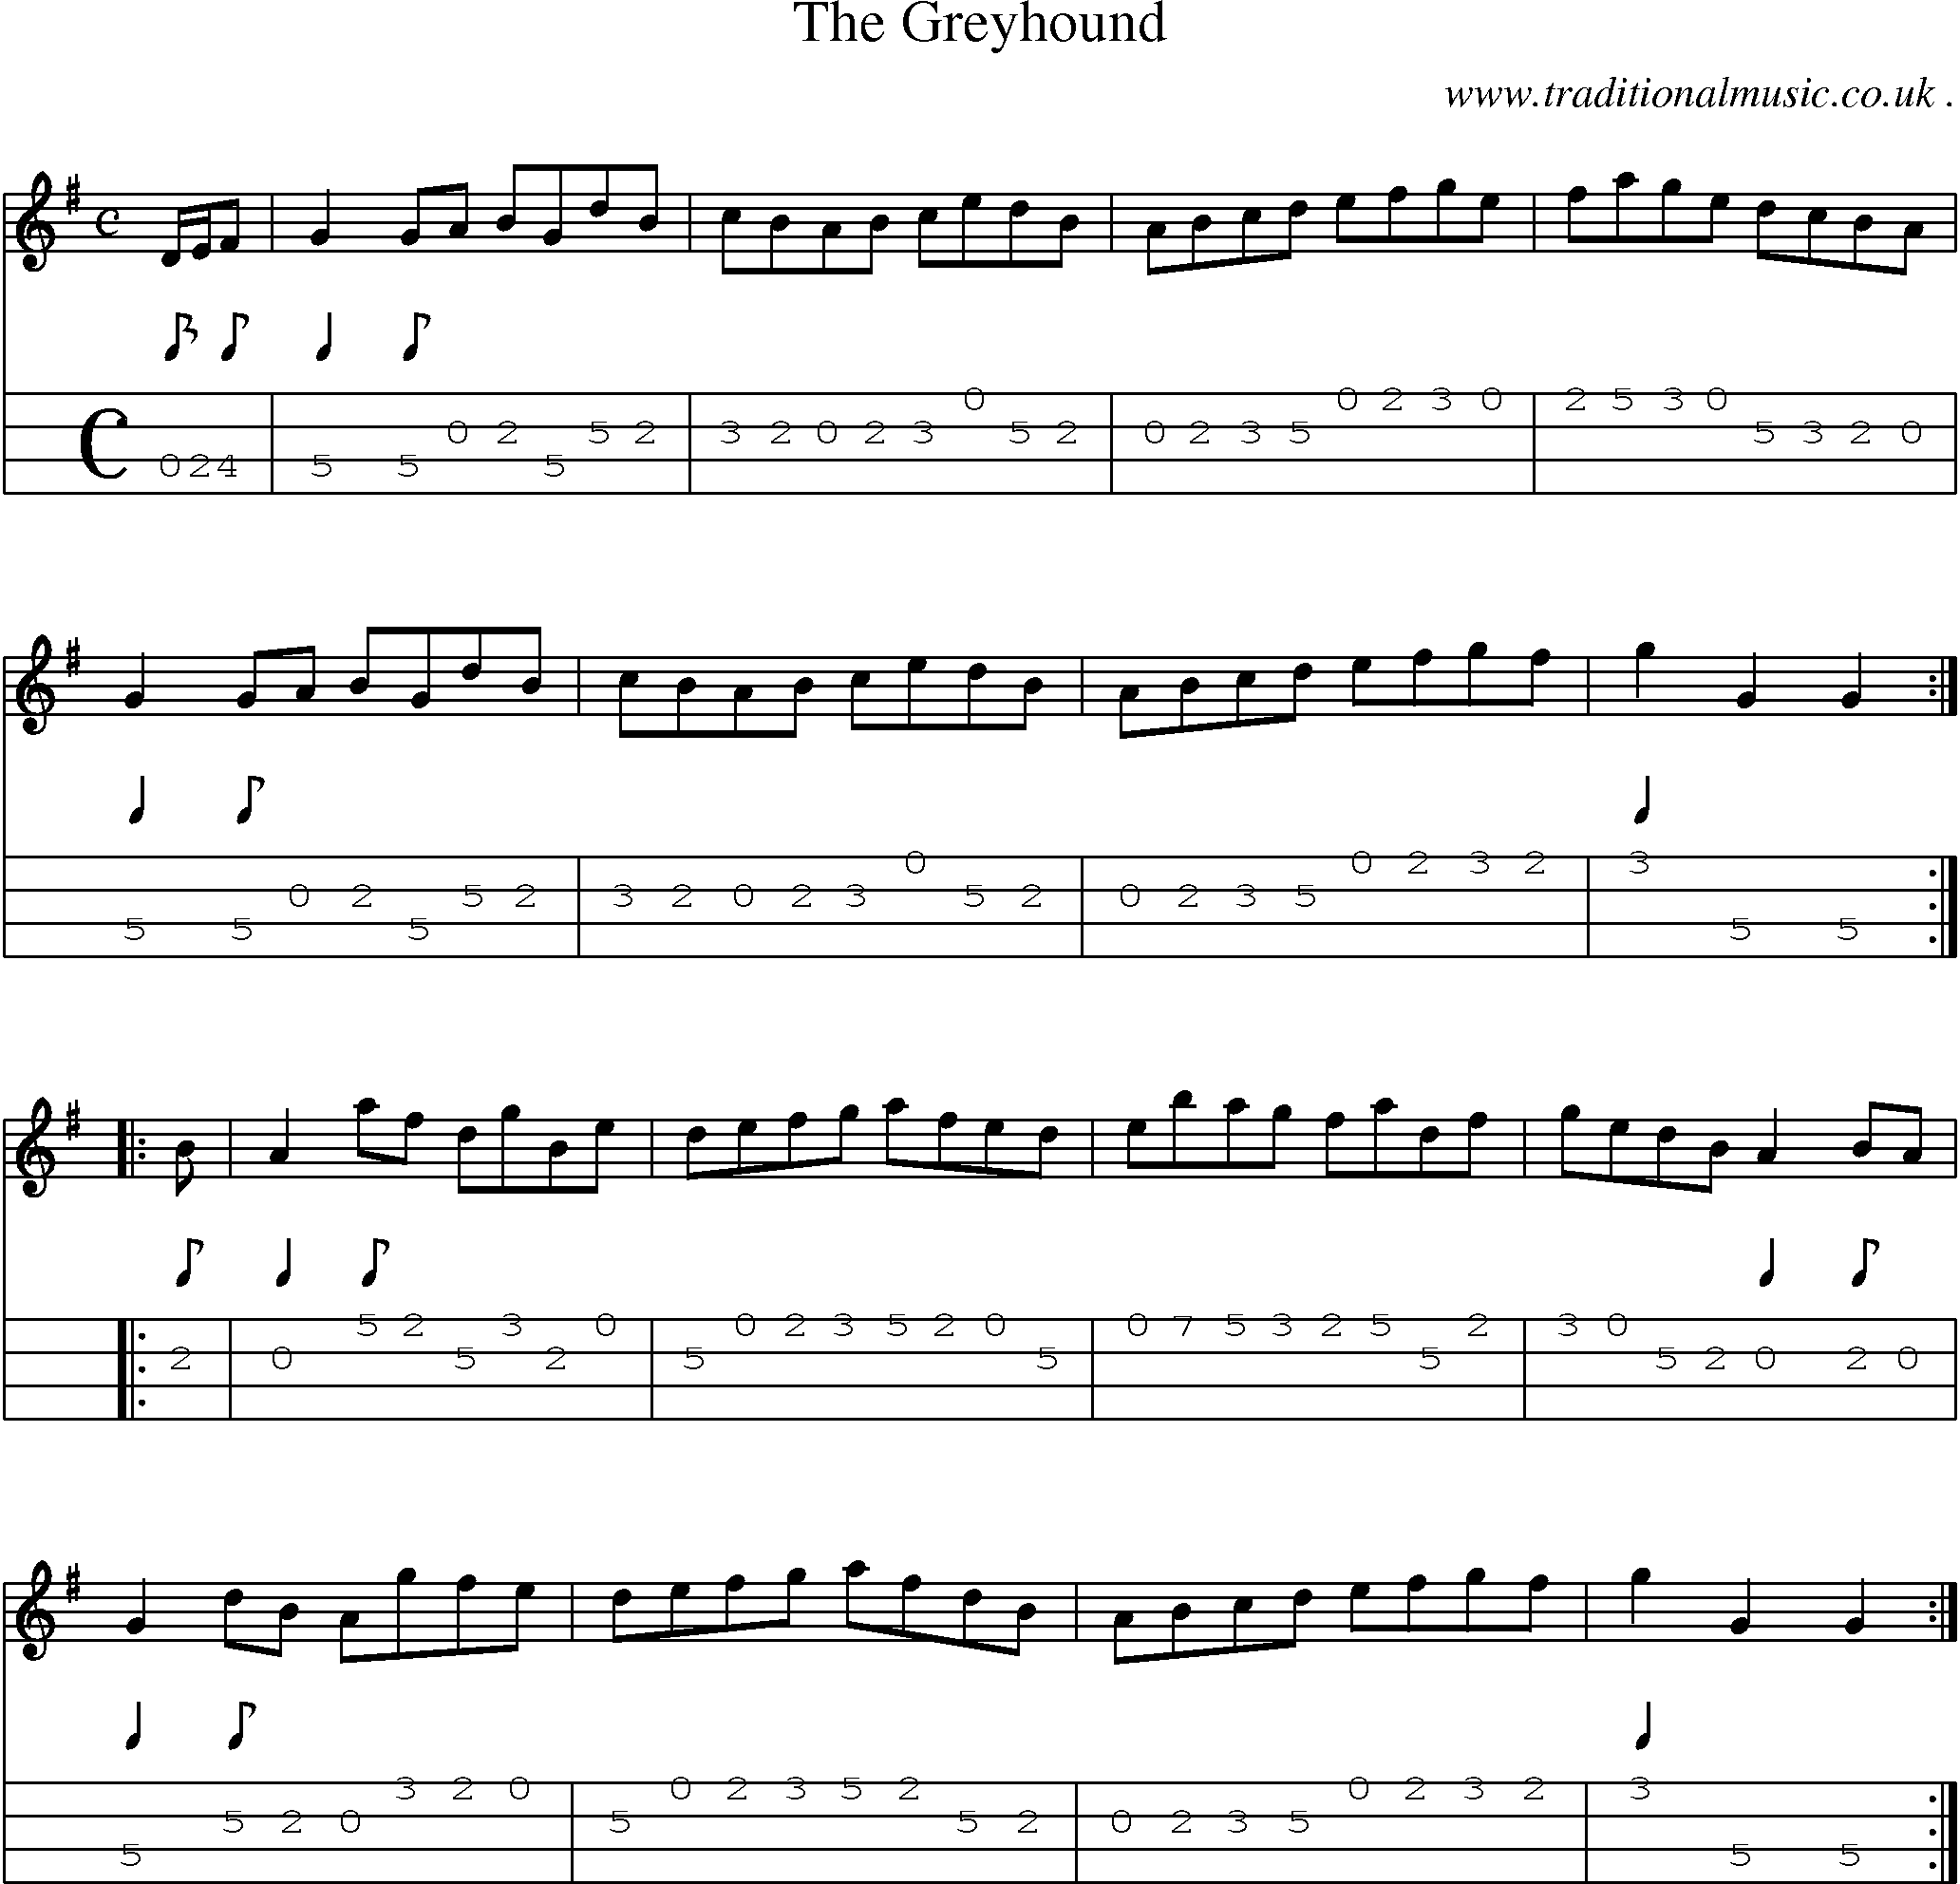 Sheet-Music and Mandolin Tabs for The Greyhound